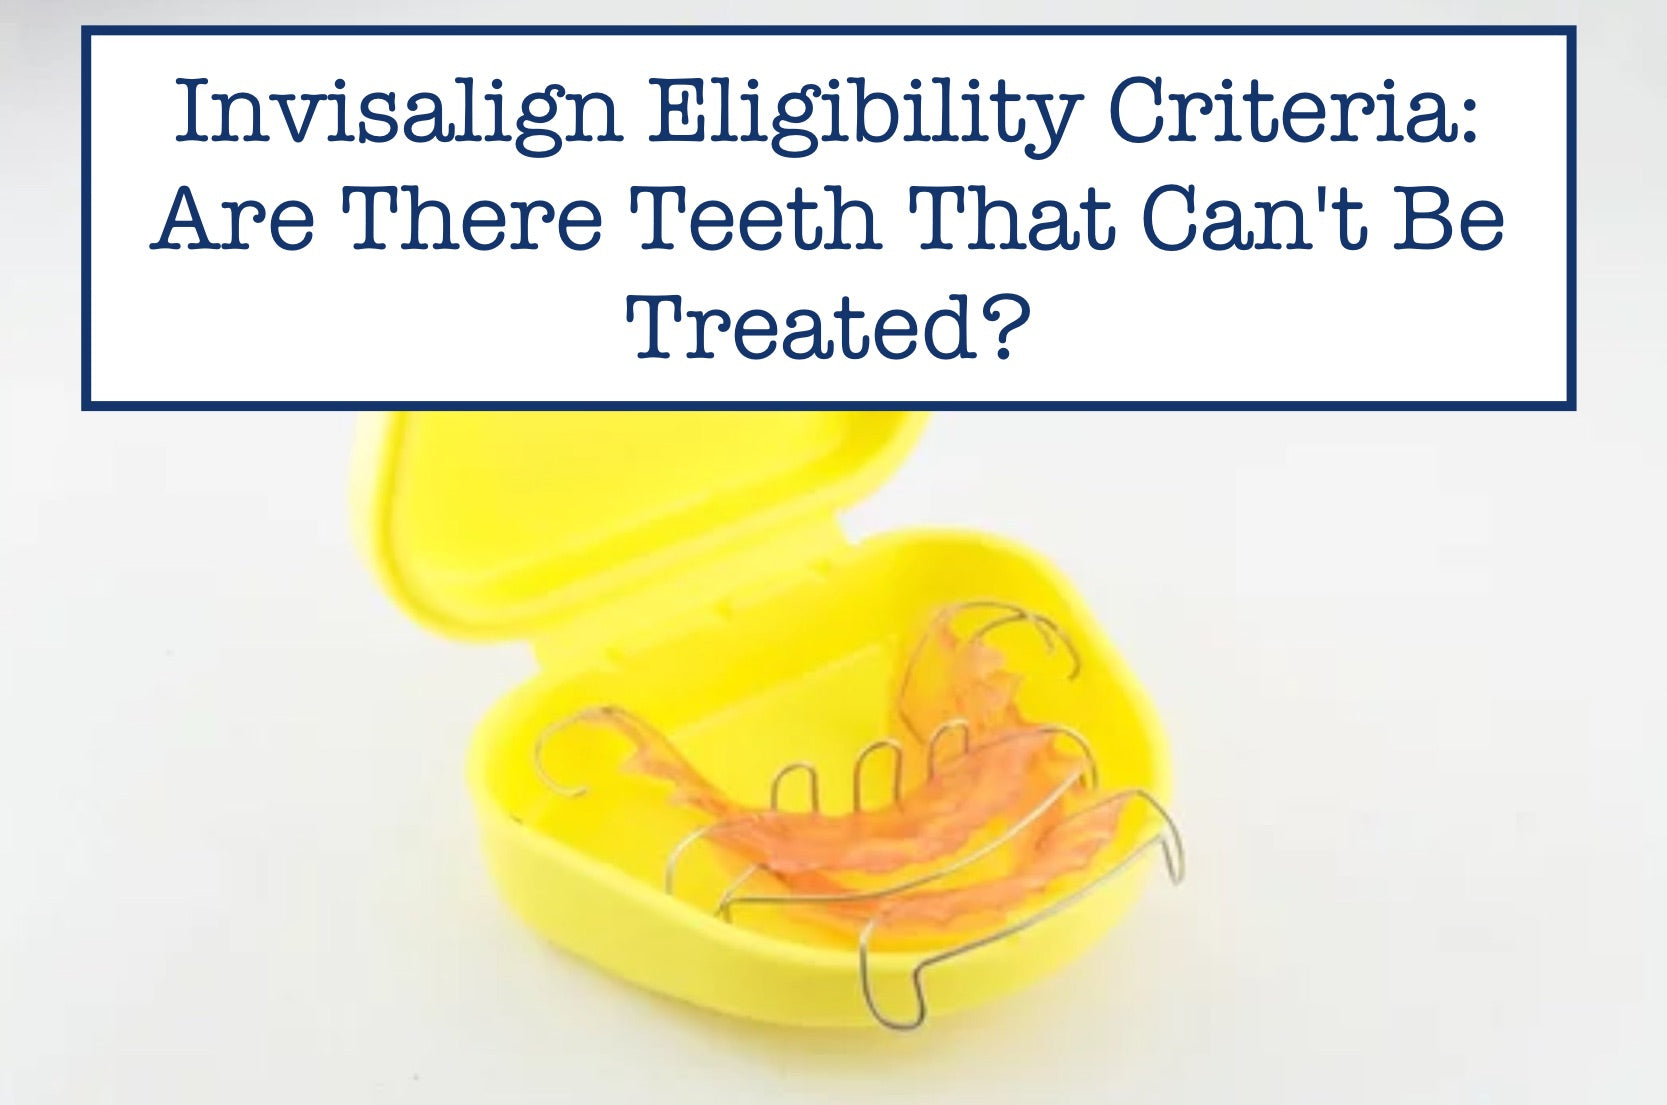 Invisalign Eligibility Criteria: Are There Teeth That Can't Be Treated?